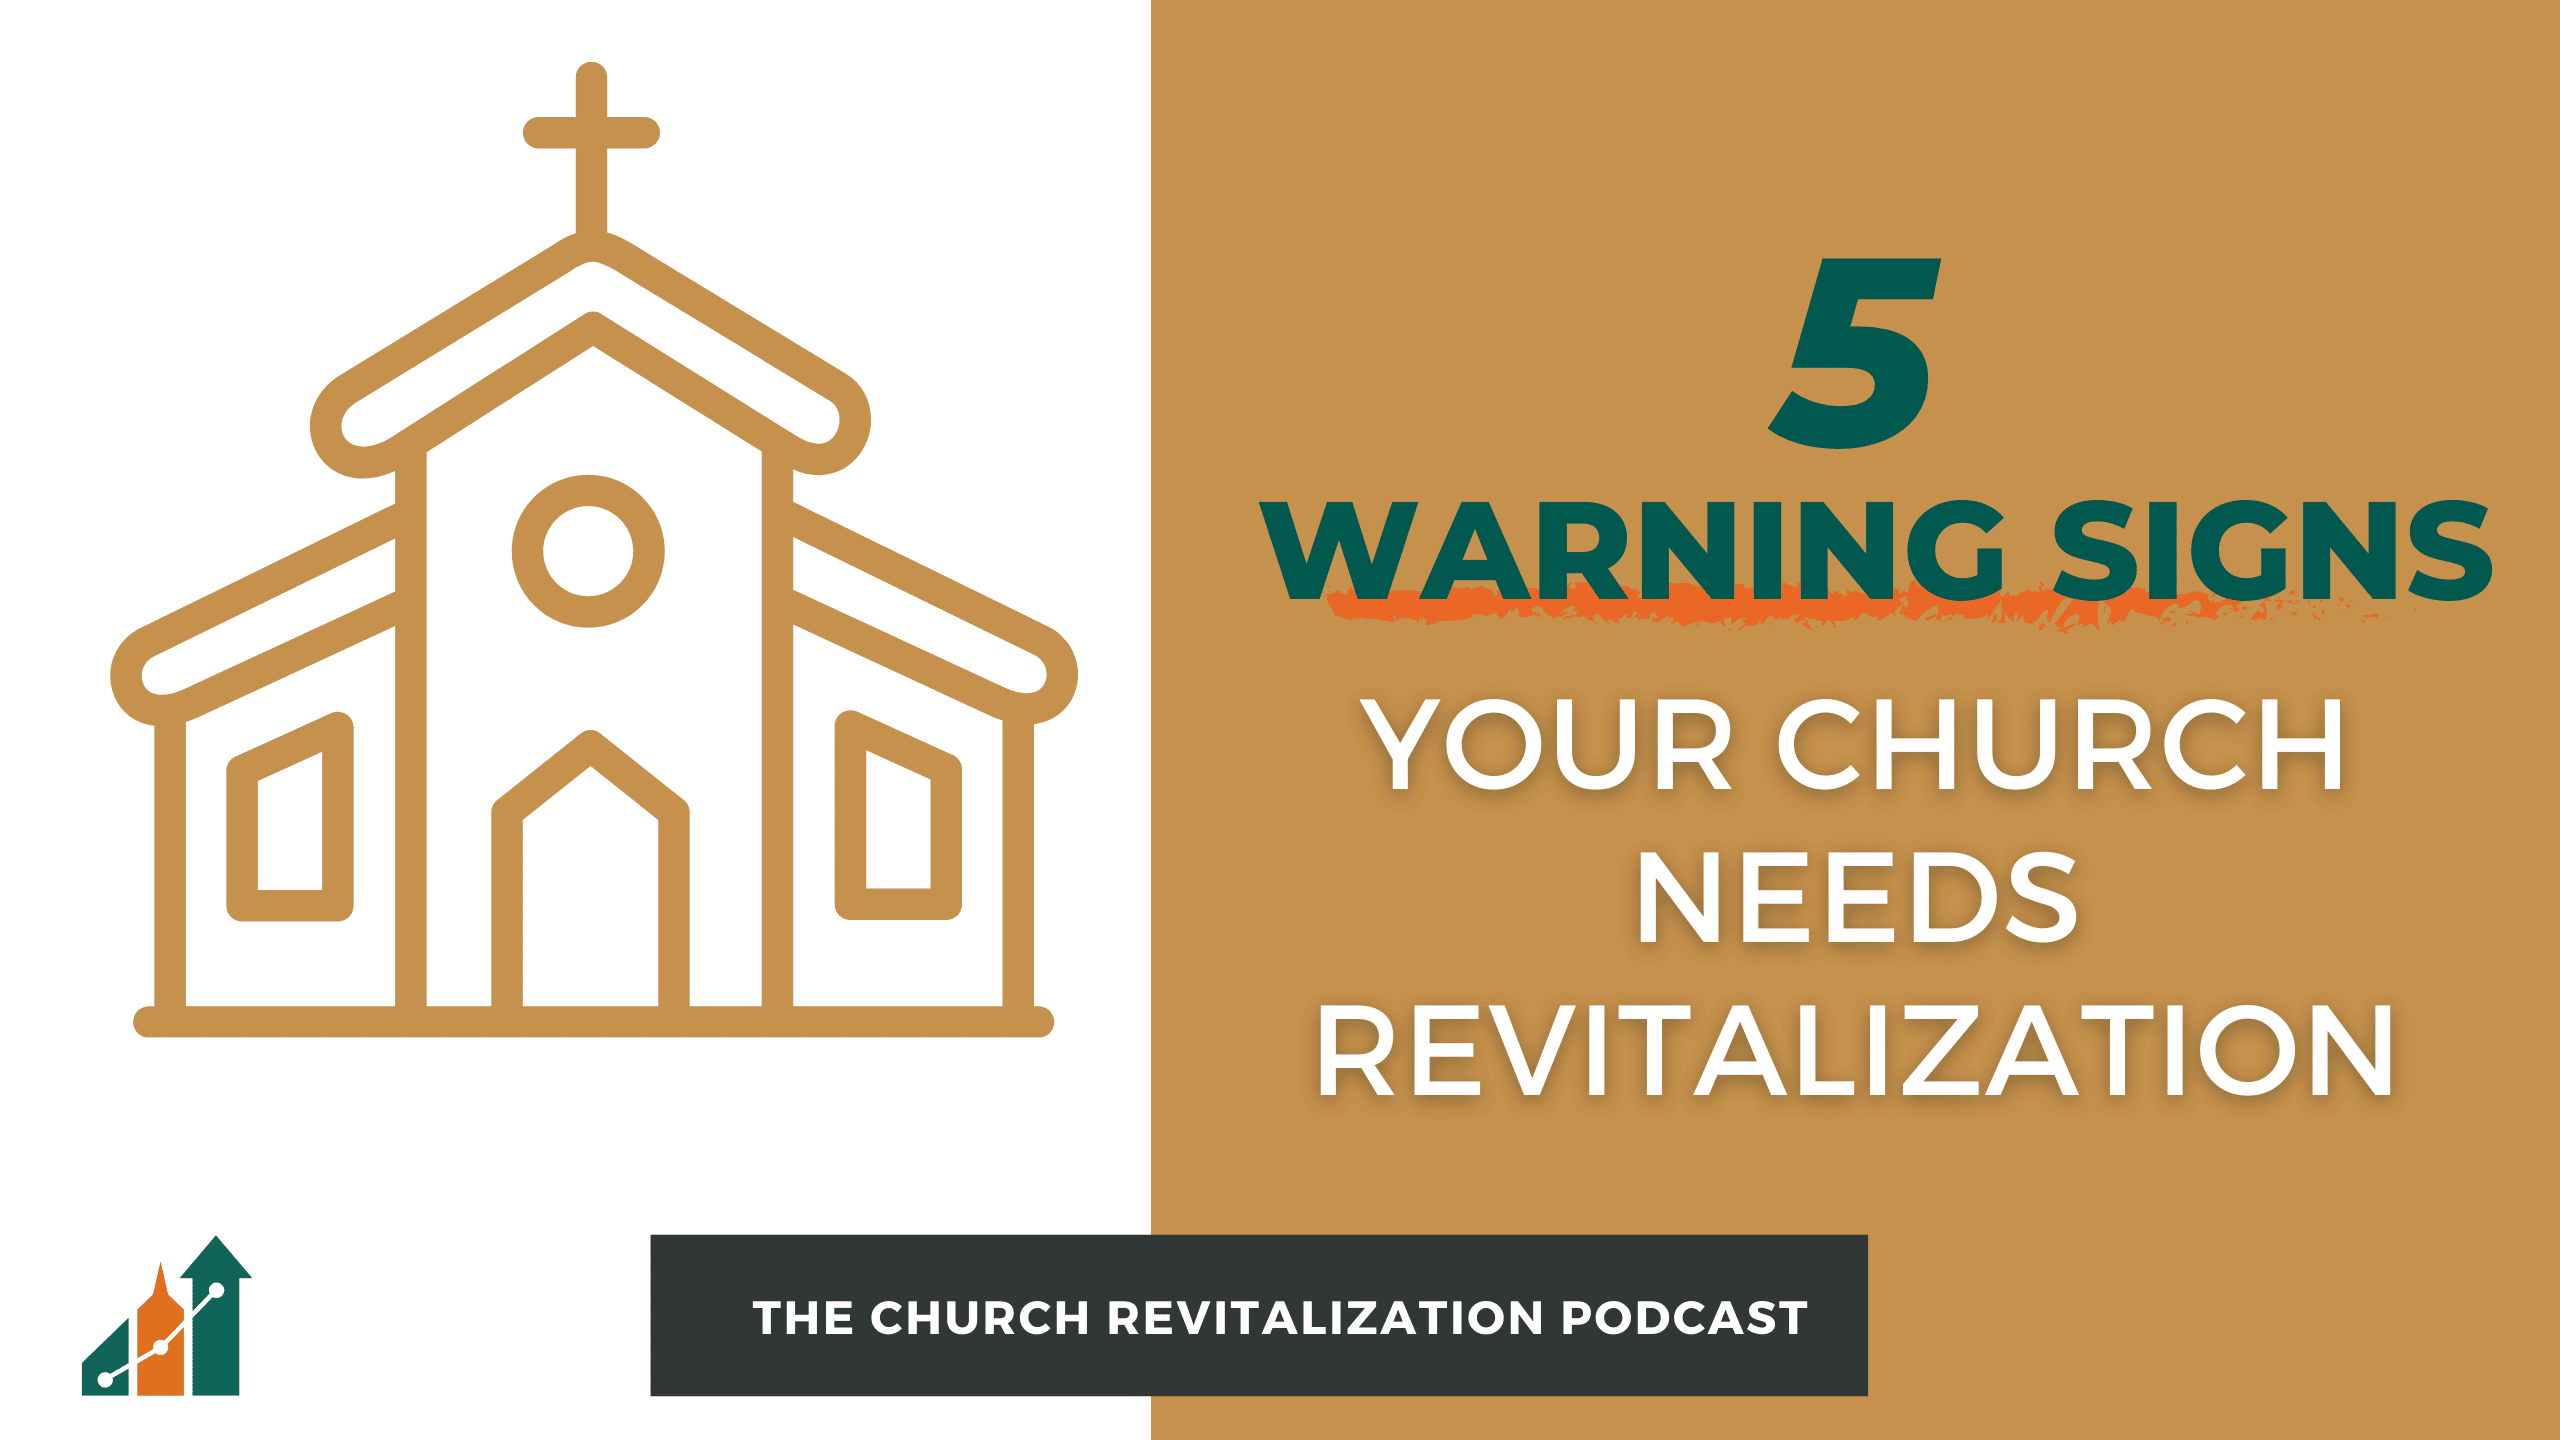 5 Warning Signs Your Church Needs Revitalization